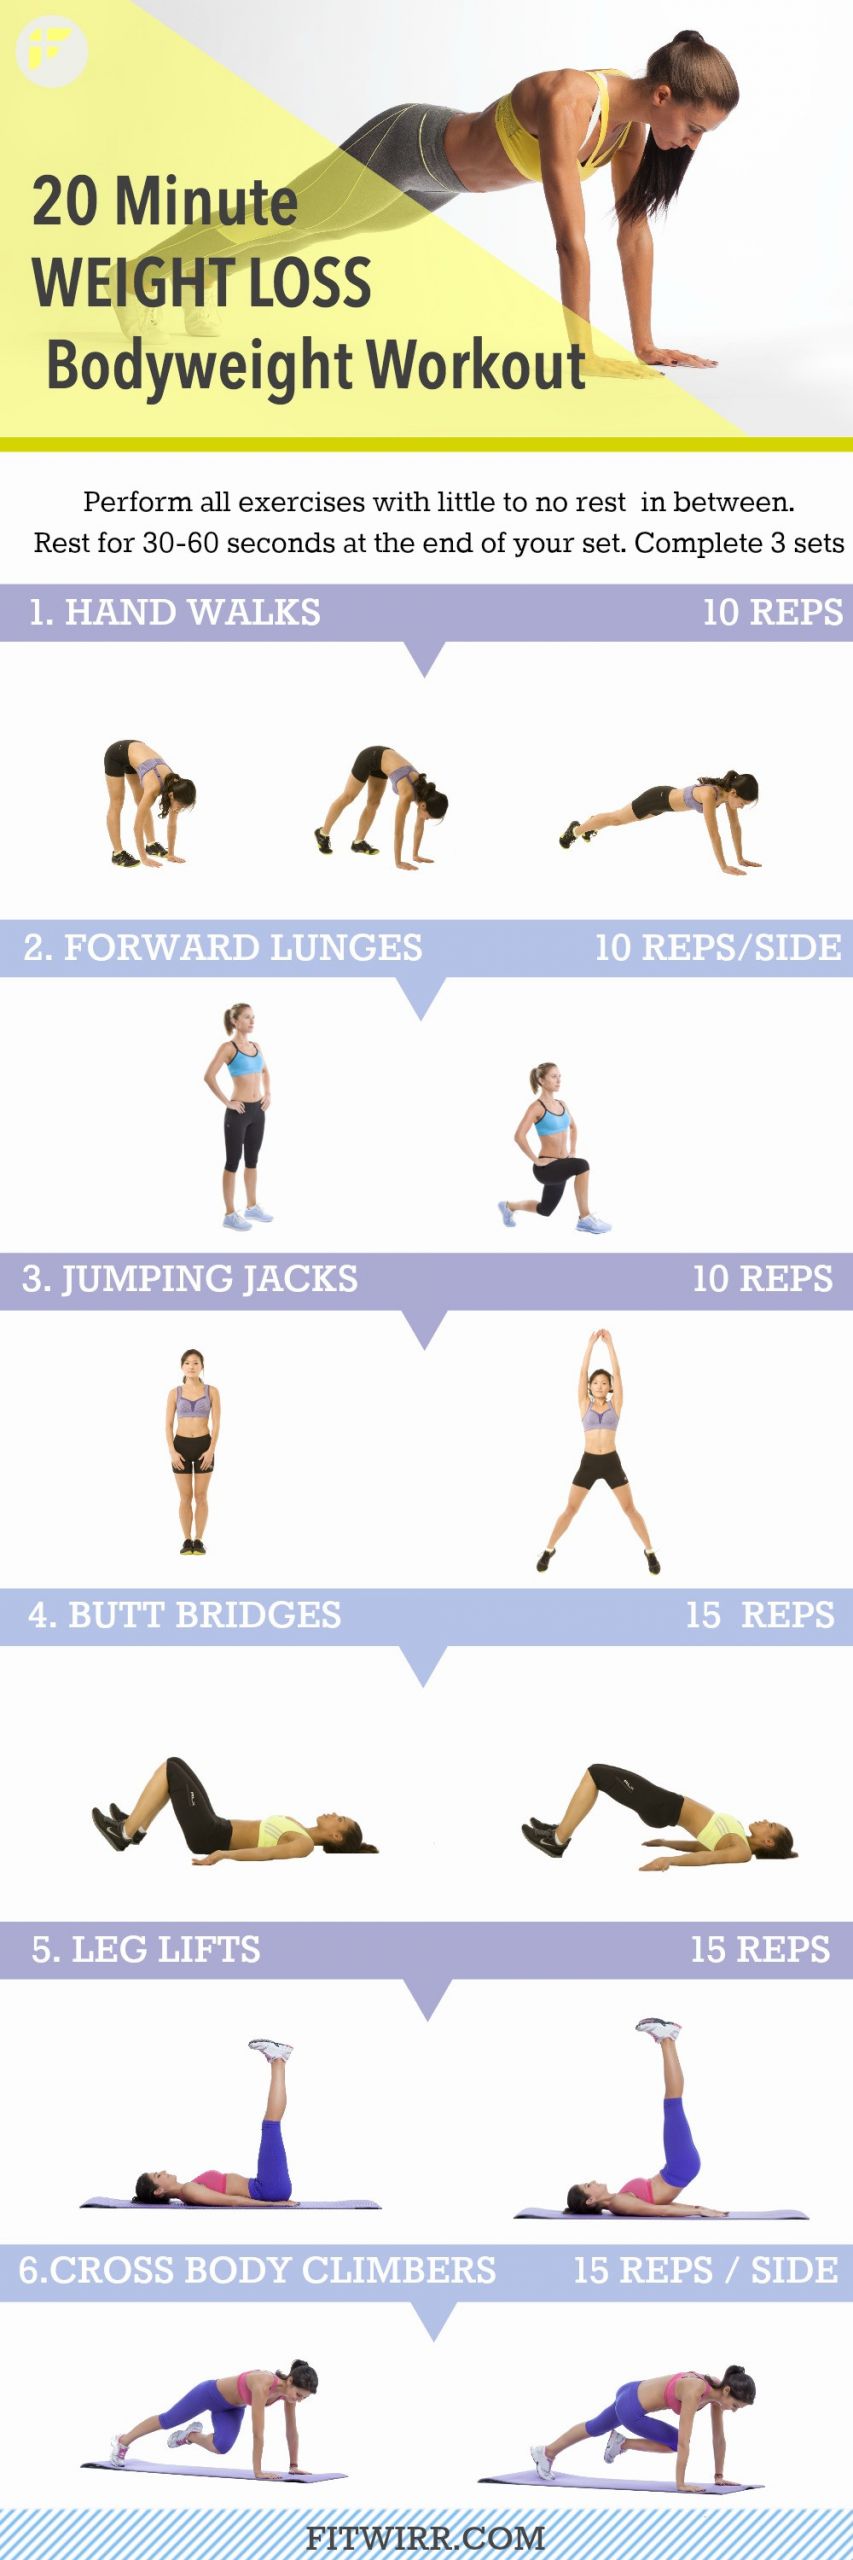 Weight Loss Exercises Fast
 The Absolute Best Workout to Lose Weight Burn Fat and